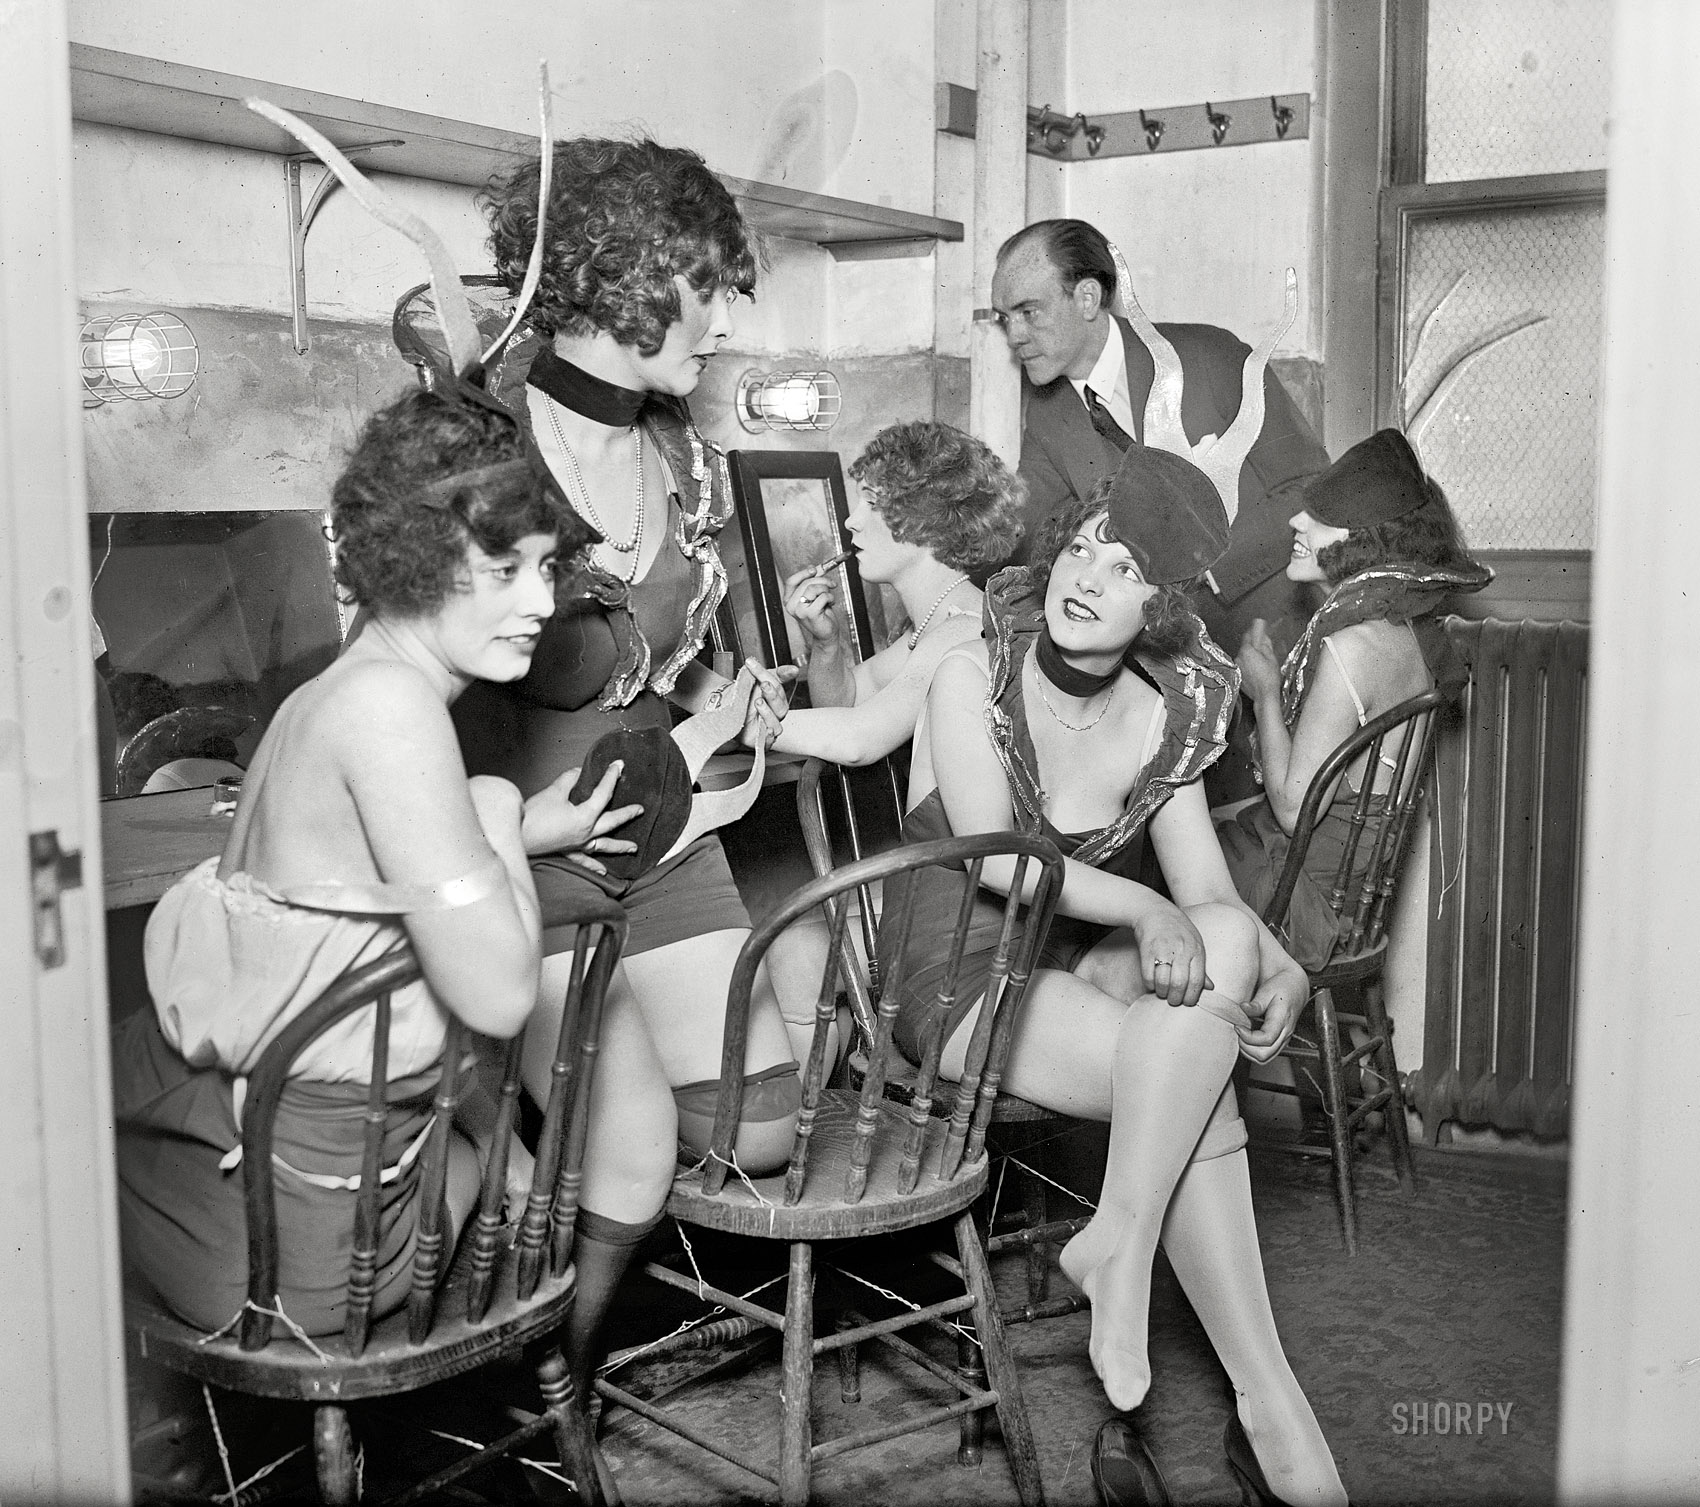 January 26, 1925. Washington, D.C. "National Theater. Earl Carroll instructing showgirls in Vanities." More of the Broadway showman and considerably more of his performers. For a decade or so, annual productions of Earl Carroll's Vanities ("Through these portals pass the most beautiful girls in the world") were a staple of the theatrical stage, "treading the fine line between titillation and indecency," as one reviewer put it. National Photo Company glass negative. View full size.